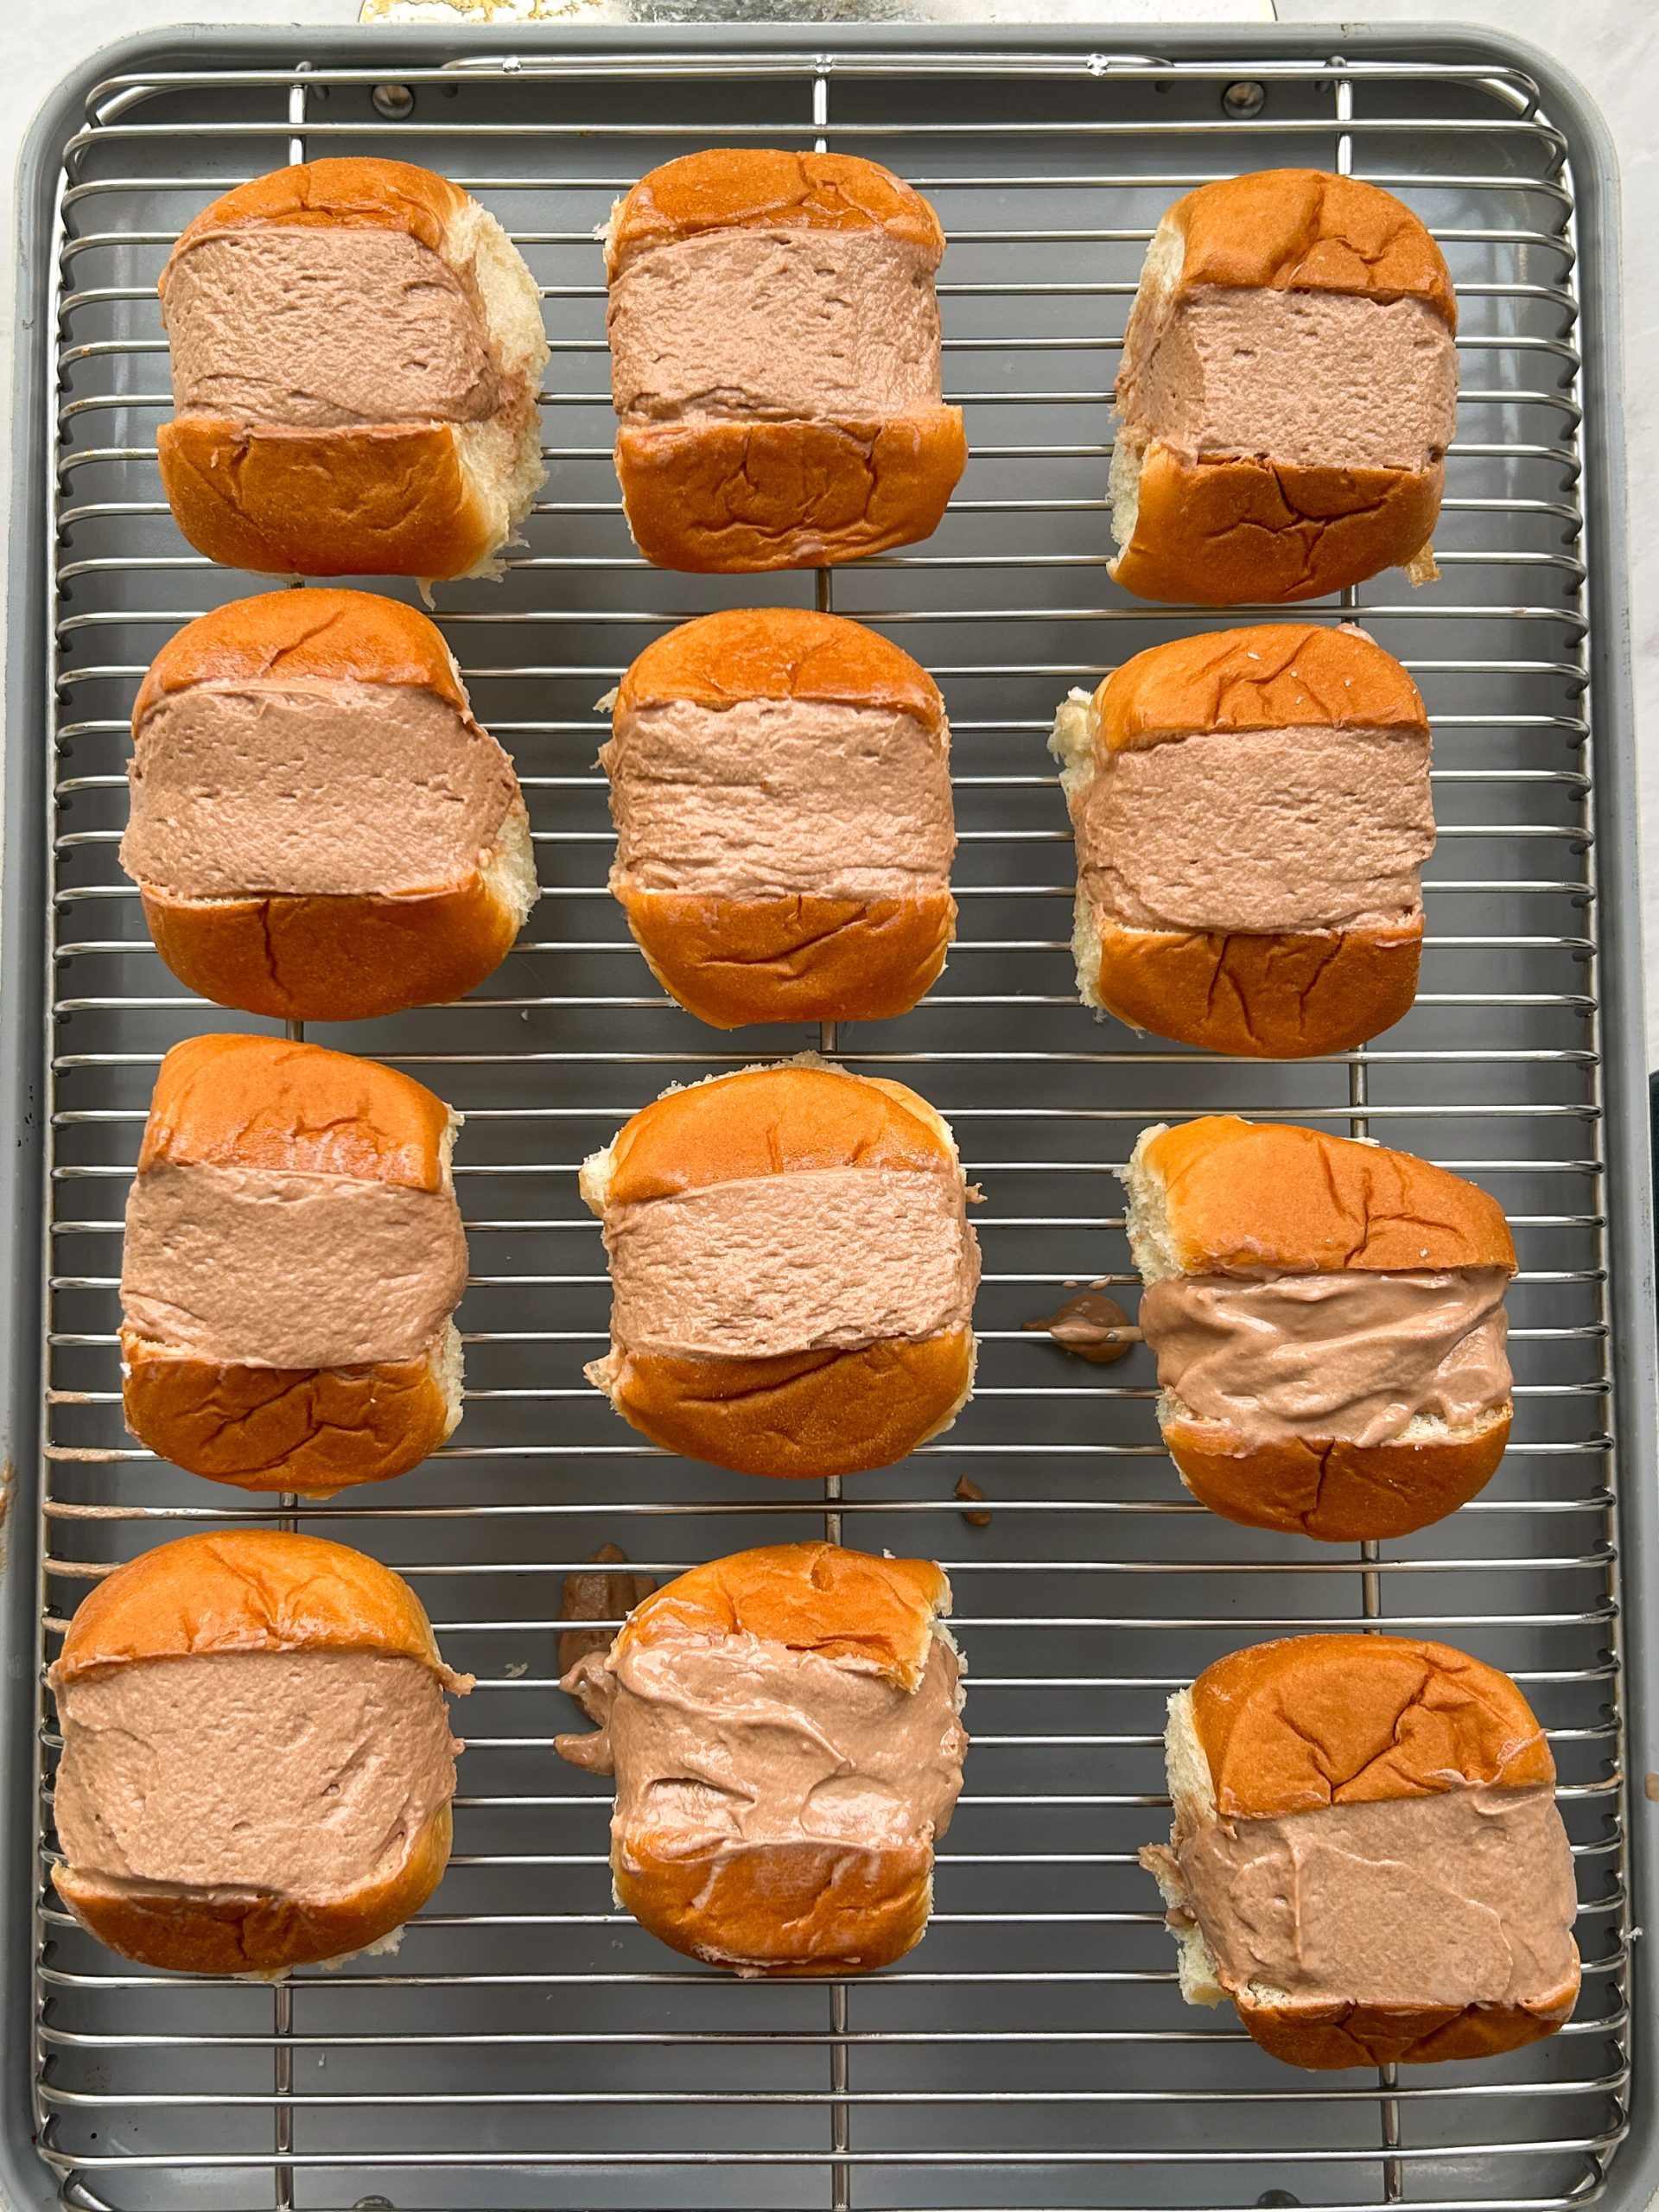 12 buns with a smooth chocolate cream filling in the middle on a wire rack